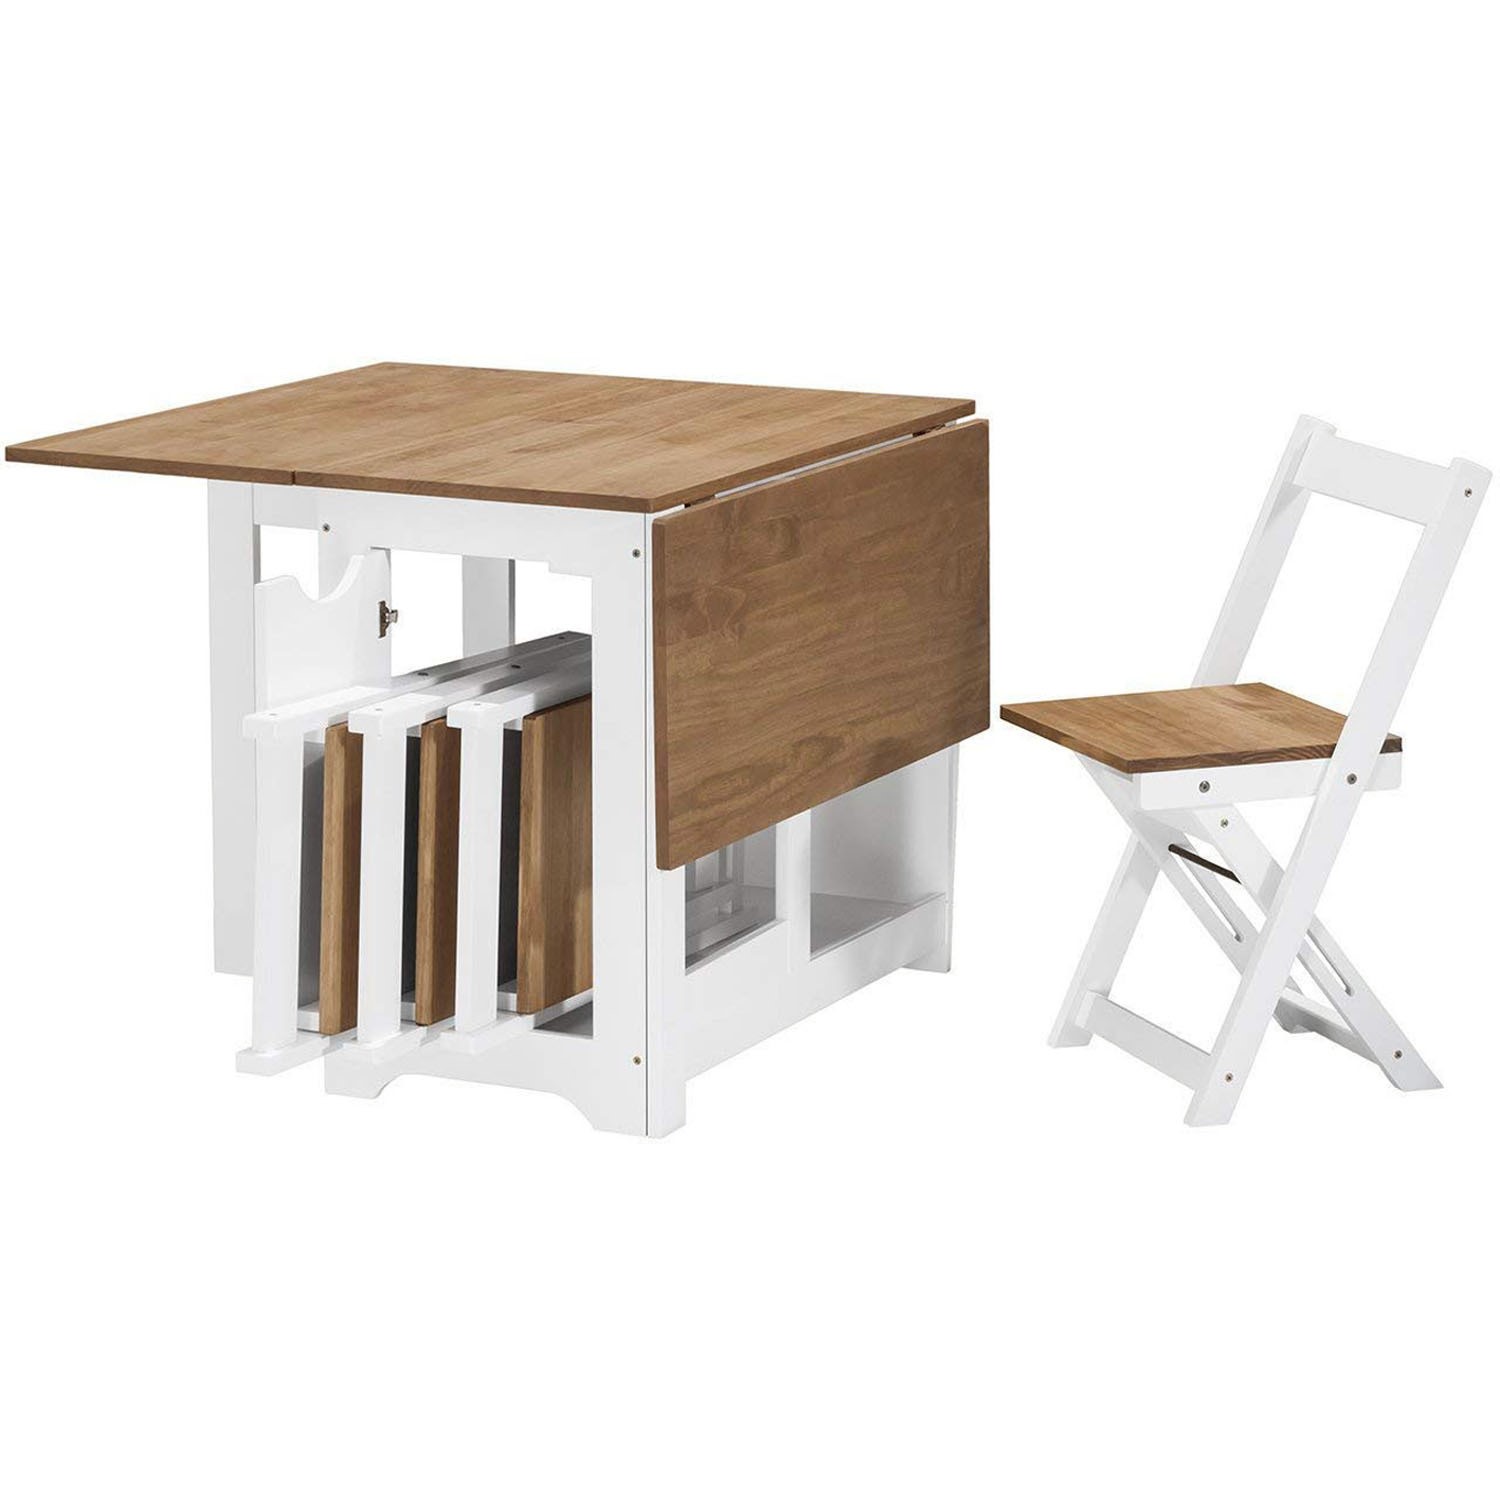 Seconique Santos Erfly Folding, Foldaway Dining Room Table And Chairs Set